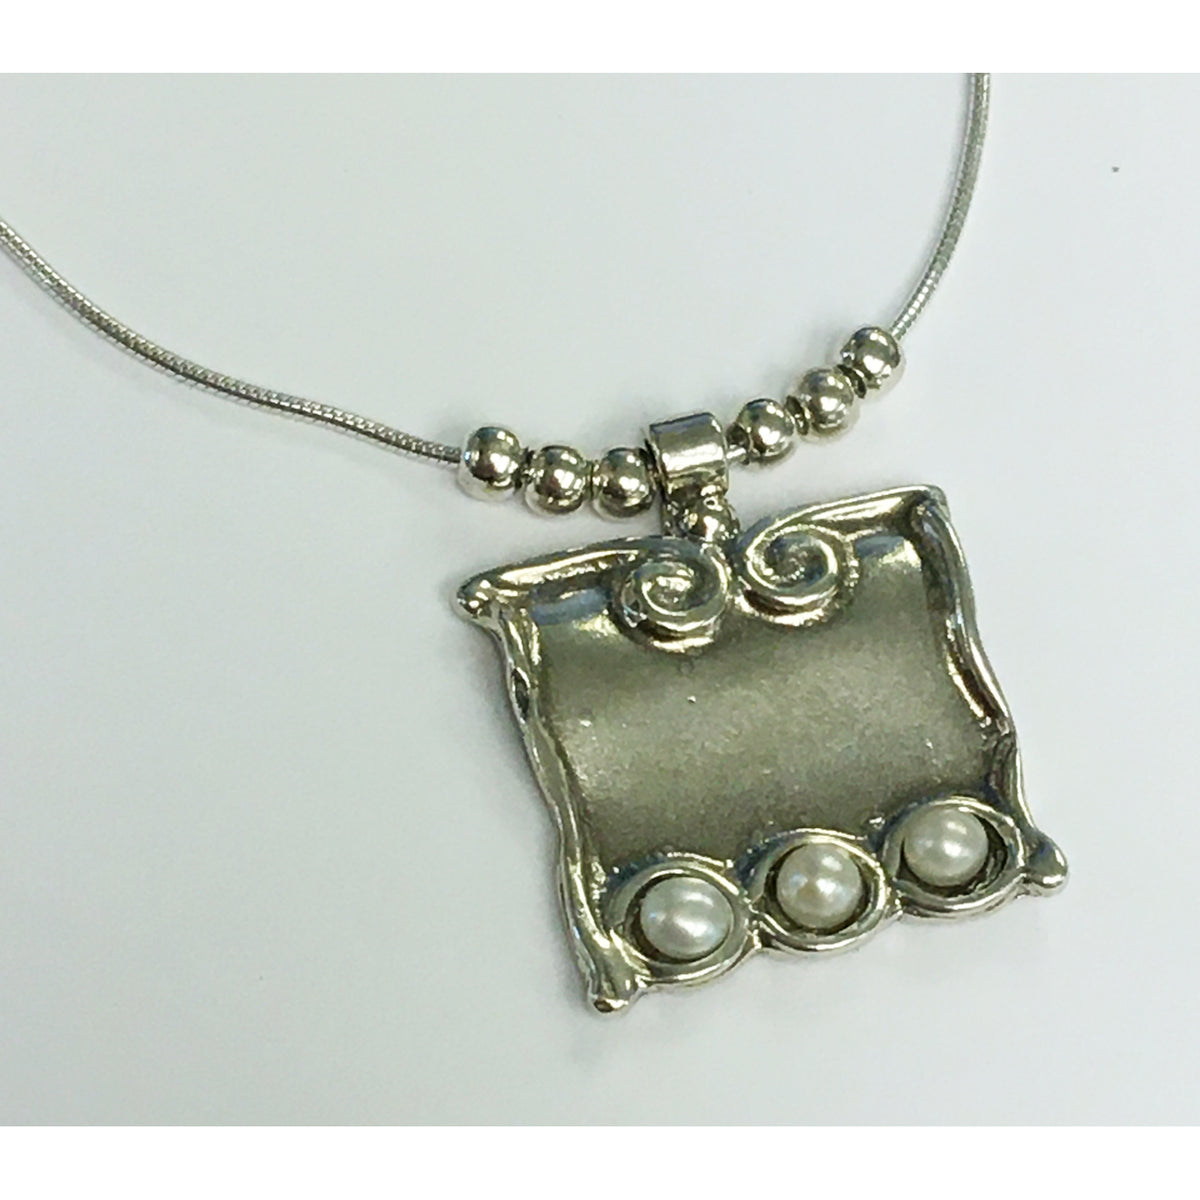 Yair Stern - Square w/p 3 Pearls Necklace